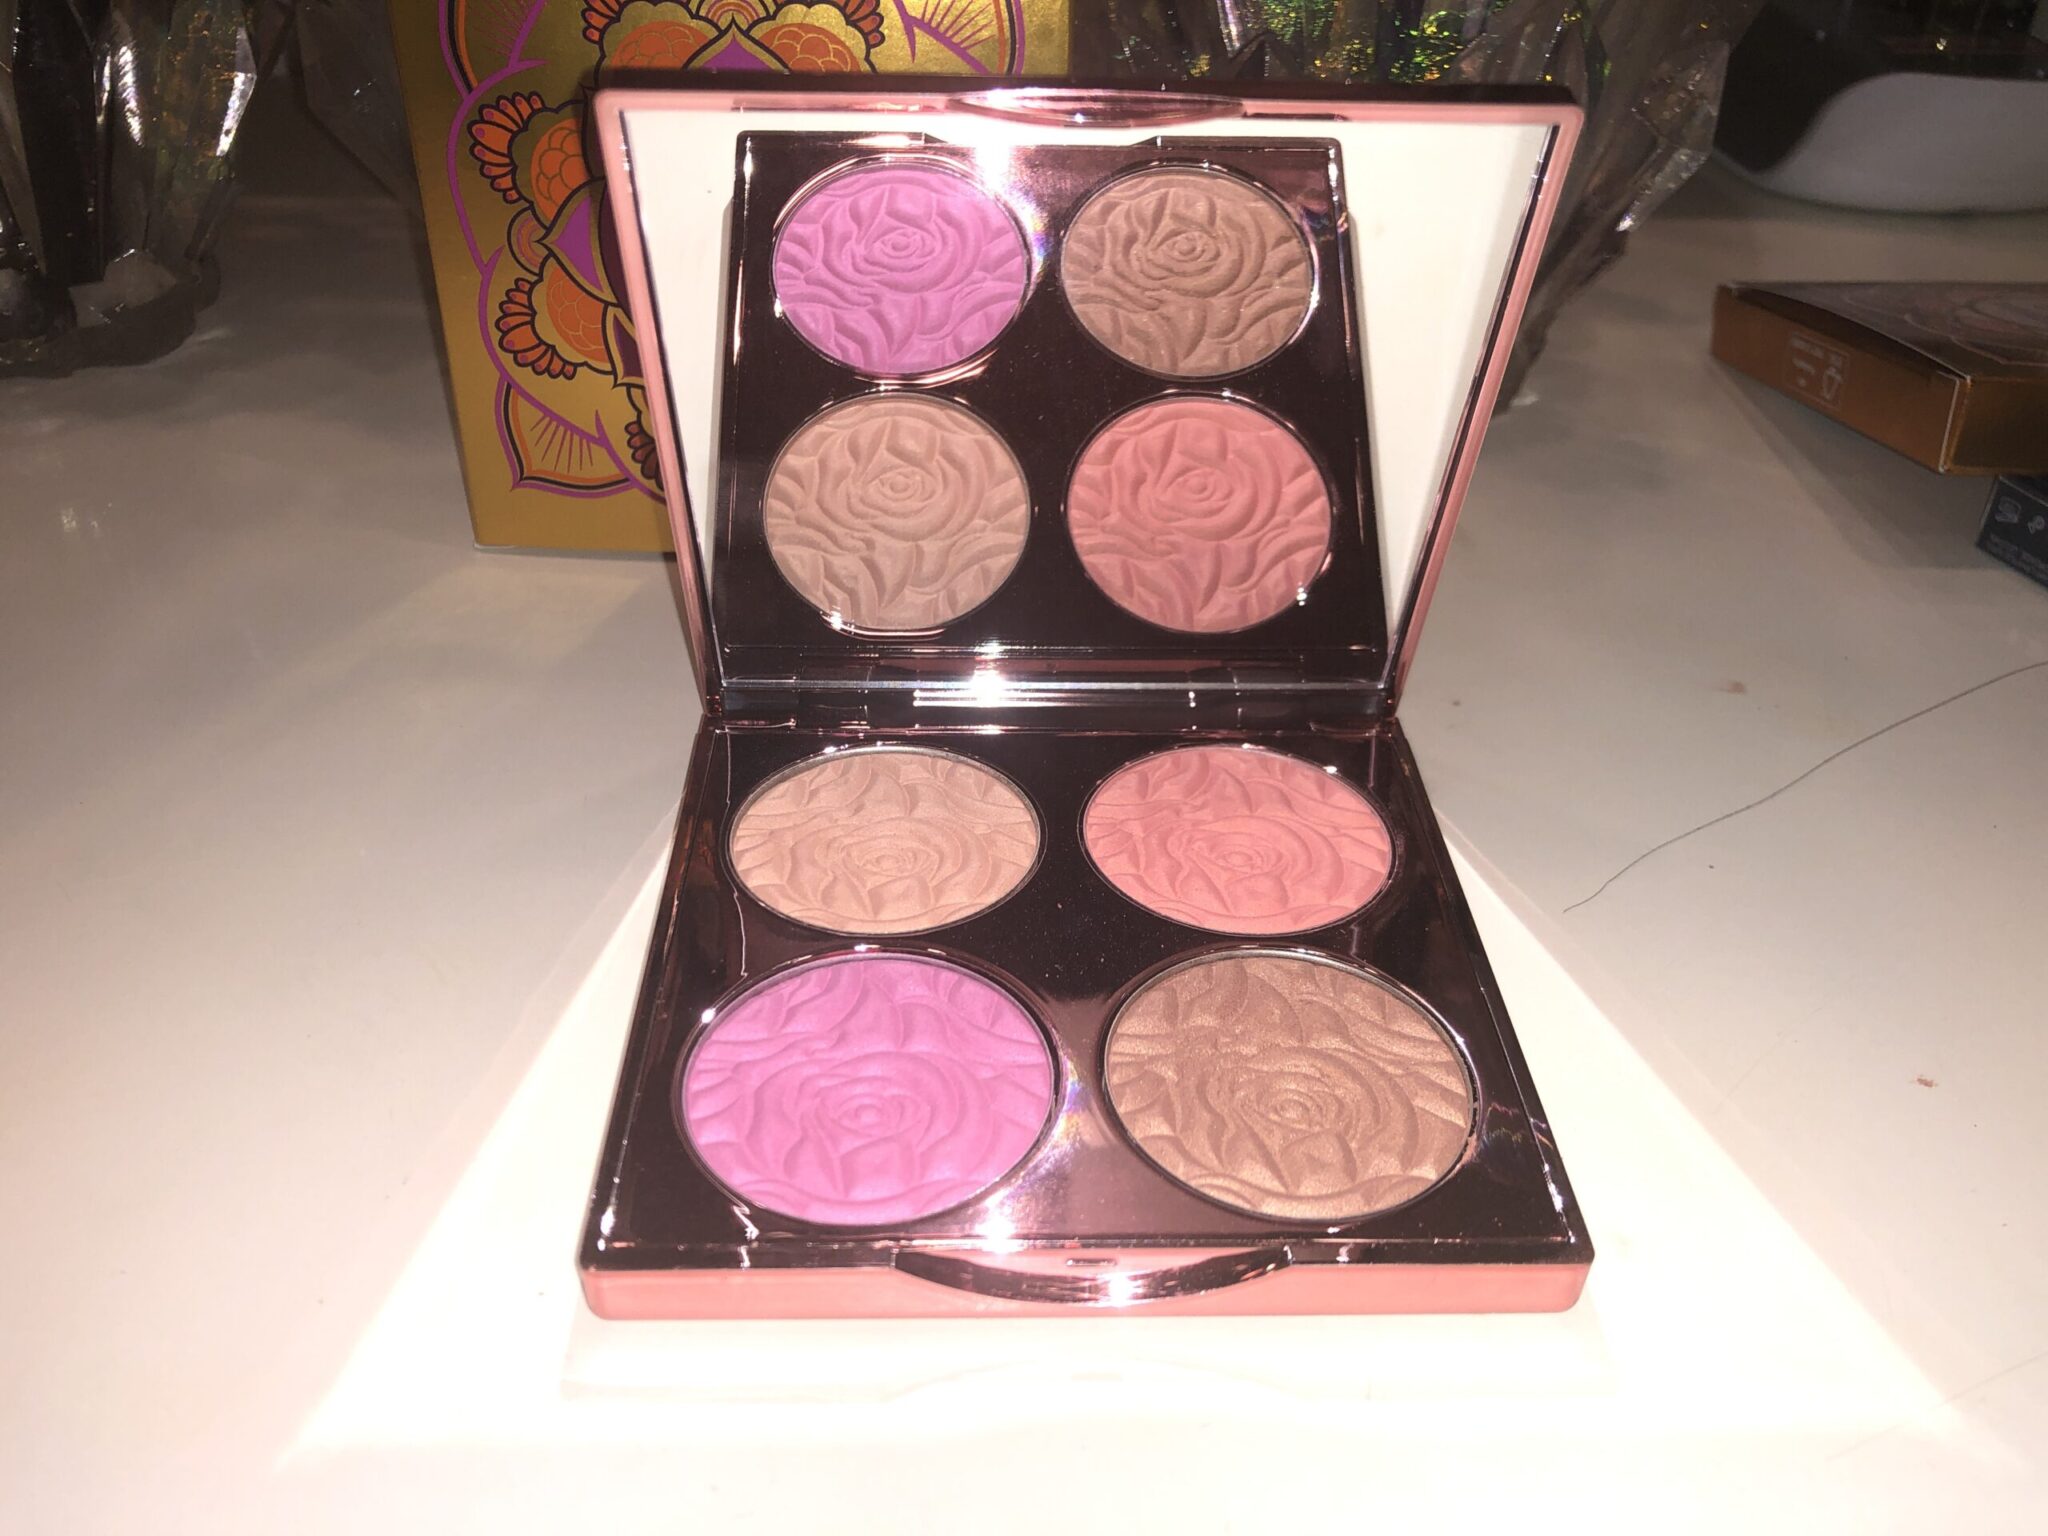 INSIDE THE BEACH BOMB PALETTE IS A MIRROR, AND FOUR PANS WITH EMBOSSED POWDERS